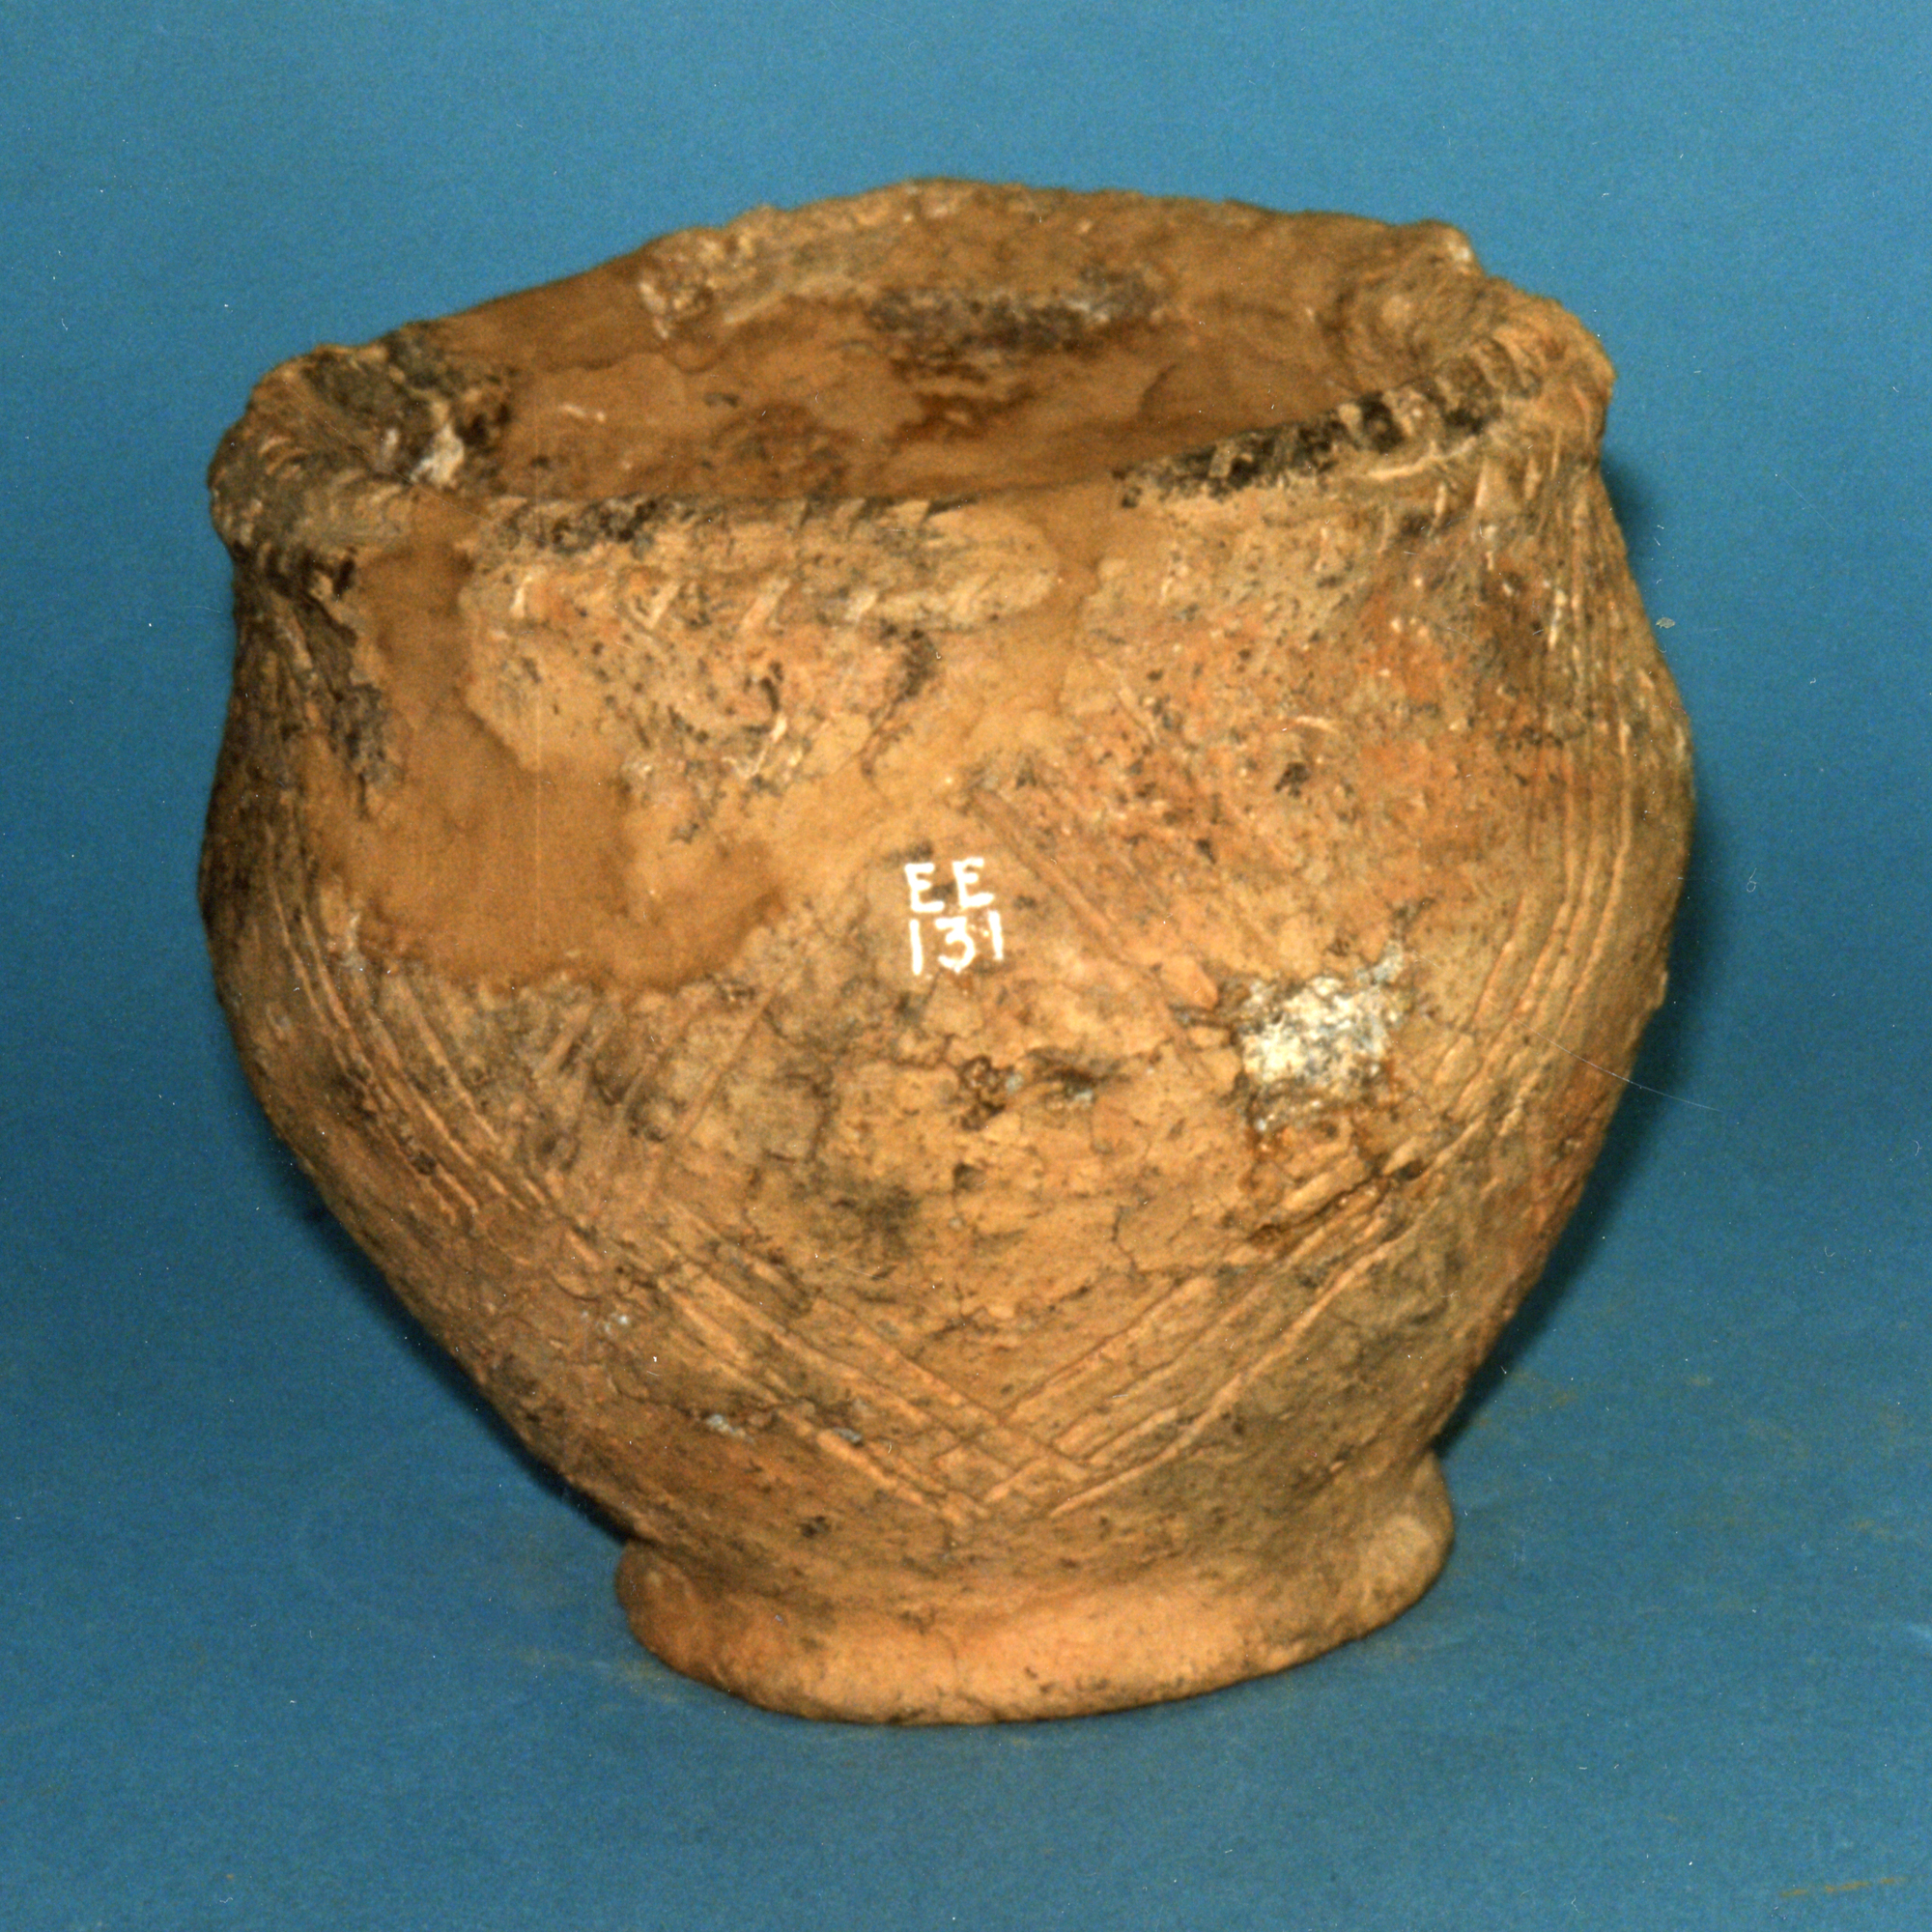 Image of Pottery food vessel from Skateraw, East Lothian © National Museums Scotland